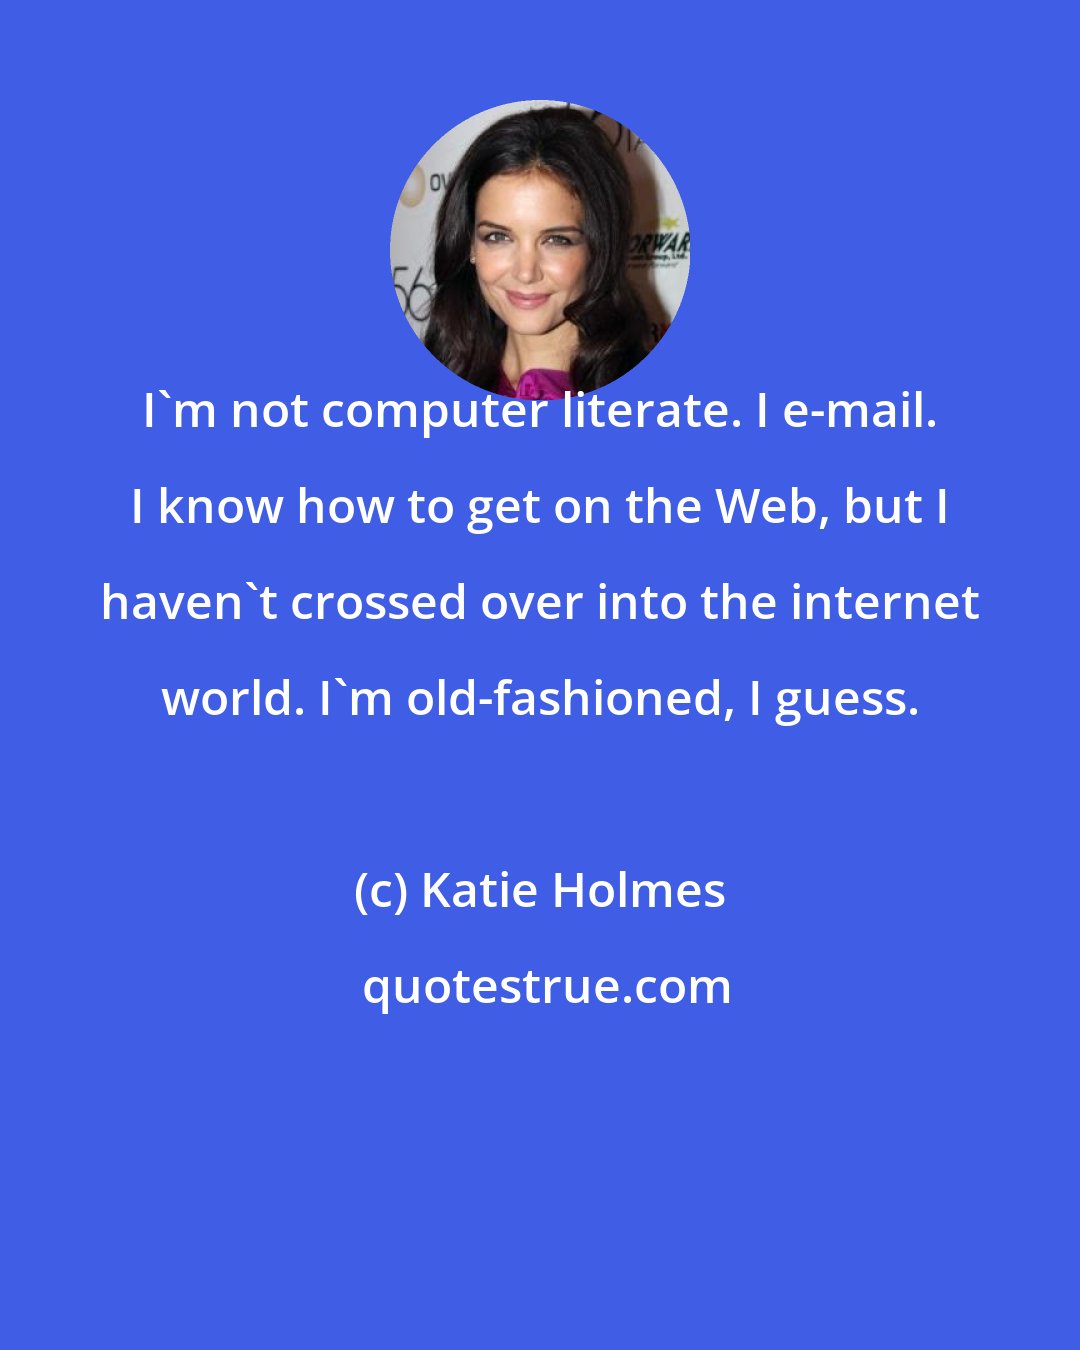 Katie Holmes: I'm not computer literate. I e-mail. I know how to get on the Web, but I haven't crossed over into the internet world. I'm old-fashioned, I guess.